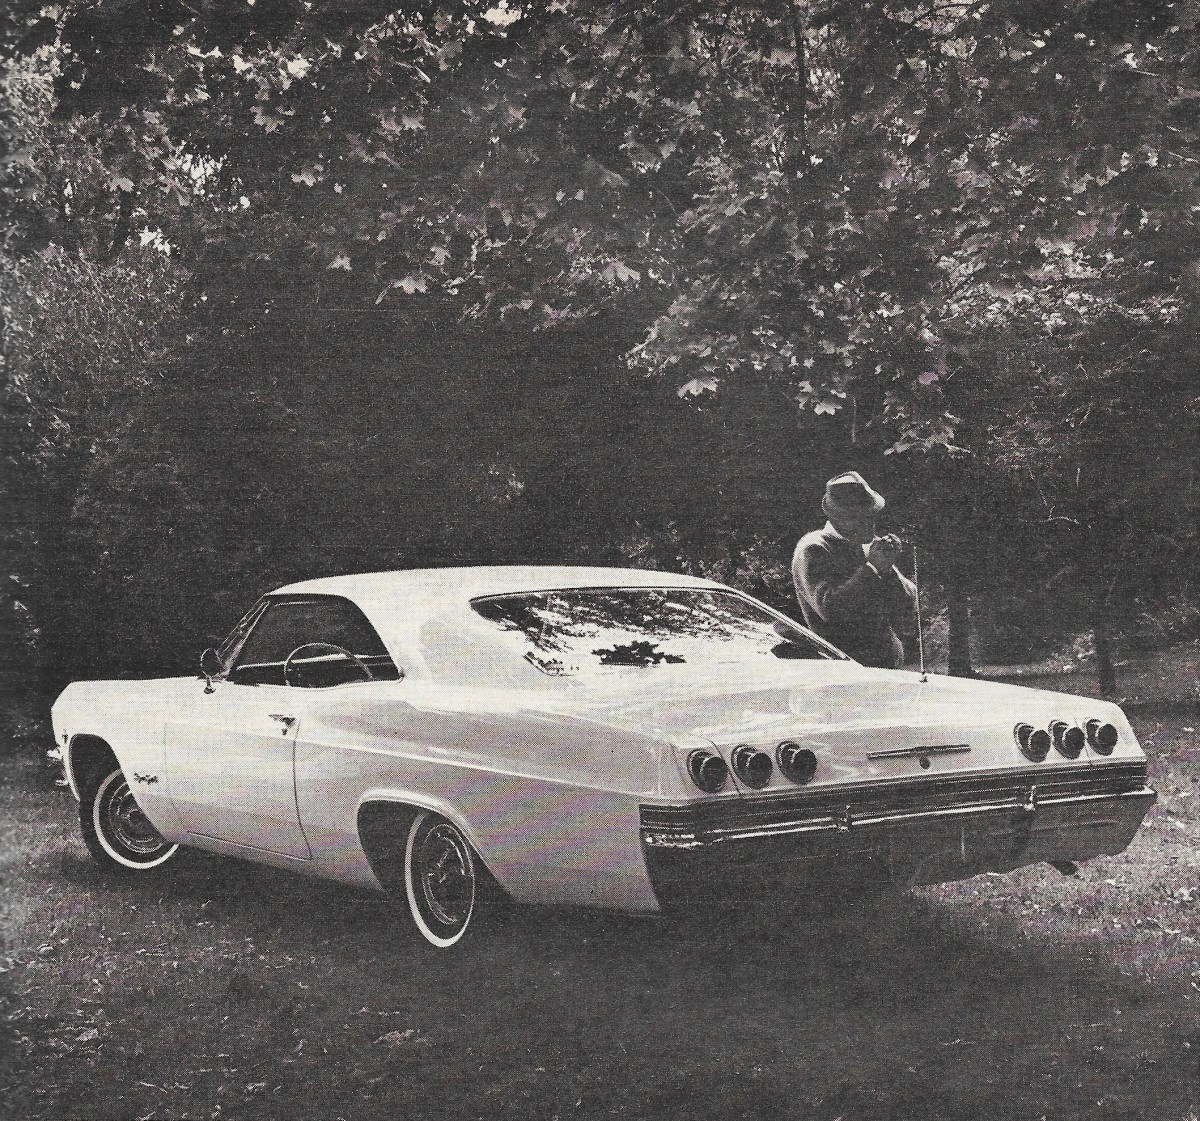 Vintage Photo of the 1965 Impala SS and her 6 Tail light design 